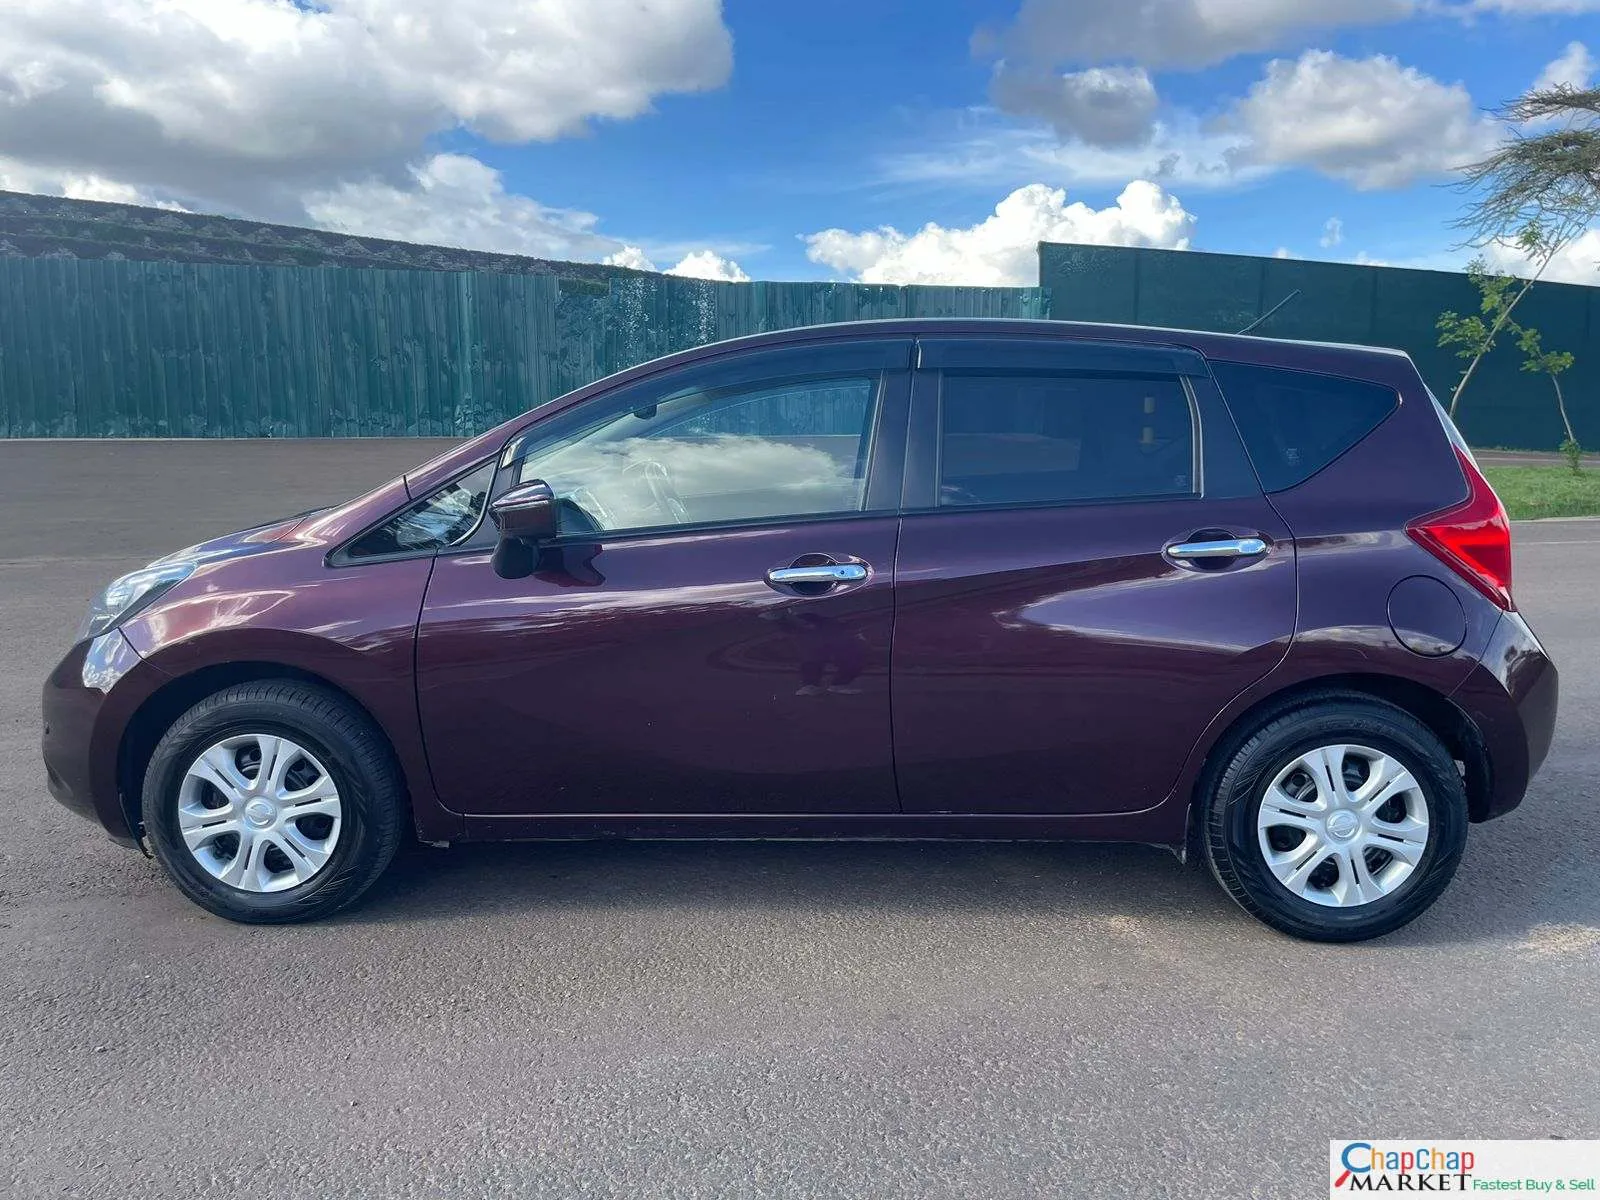 Nissan Note Kenya New QUICK SALE You Pay 20% Deposit Trade in Ok Nissan Note for sale in kenya hire purchase installments EXCLUSIVE 2017